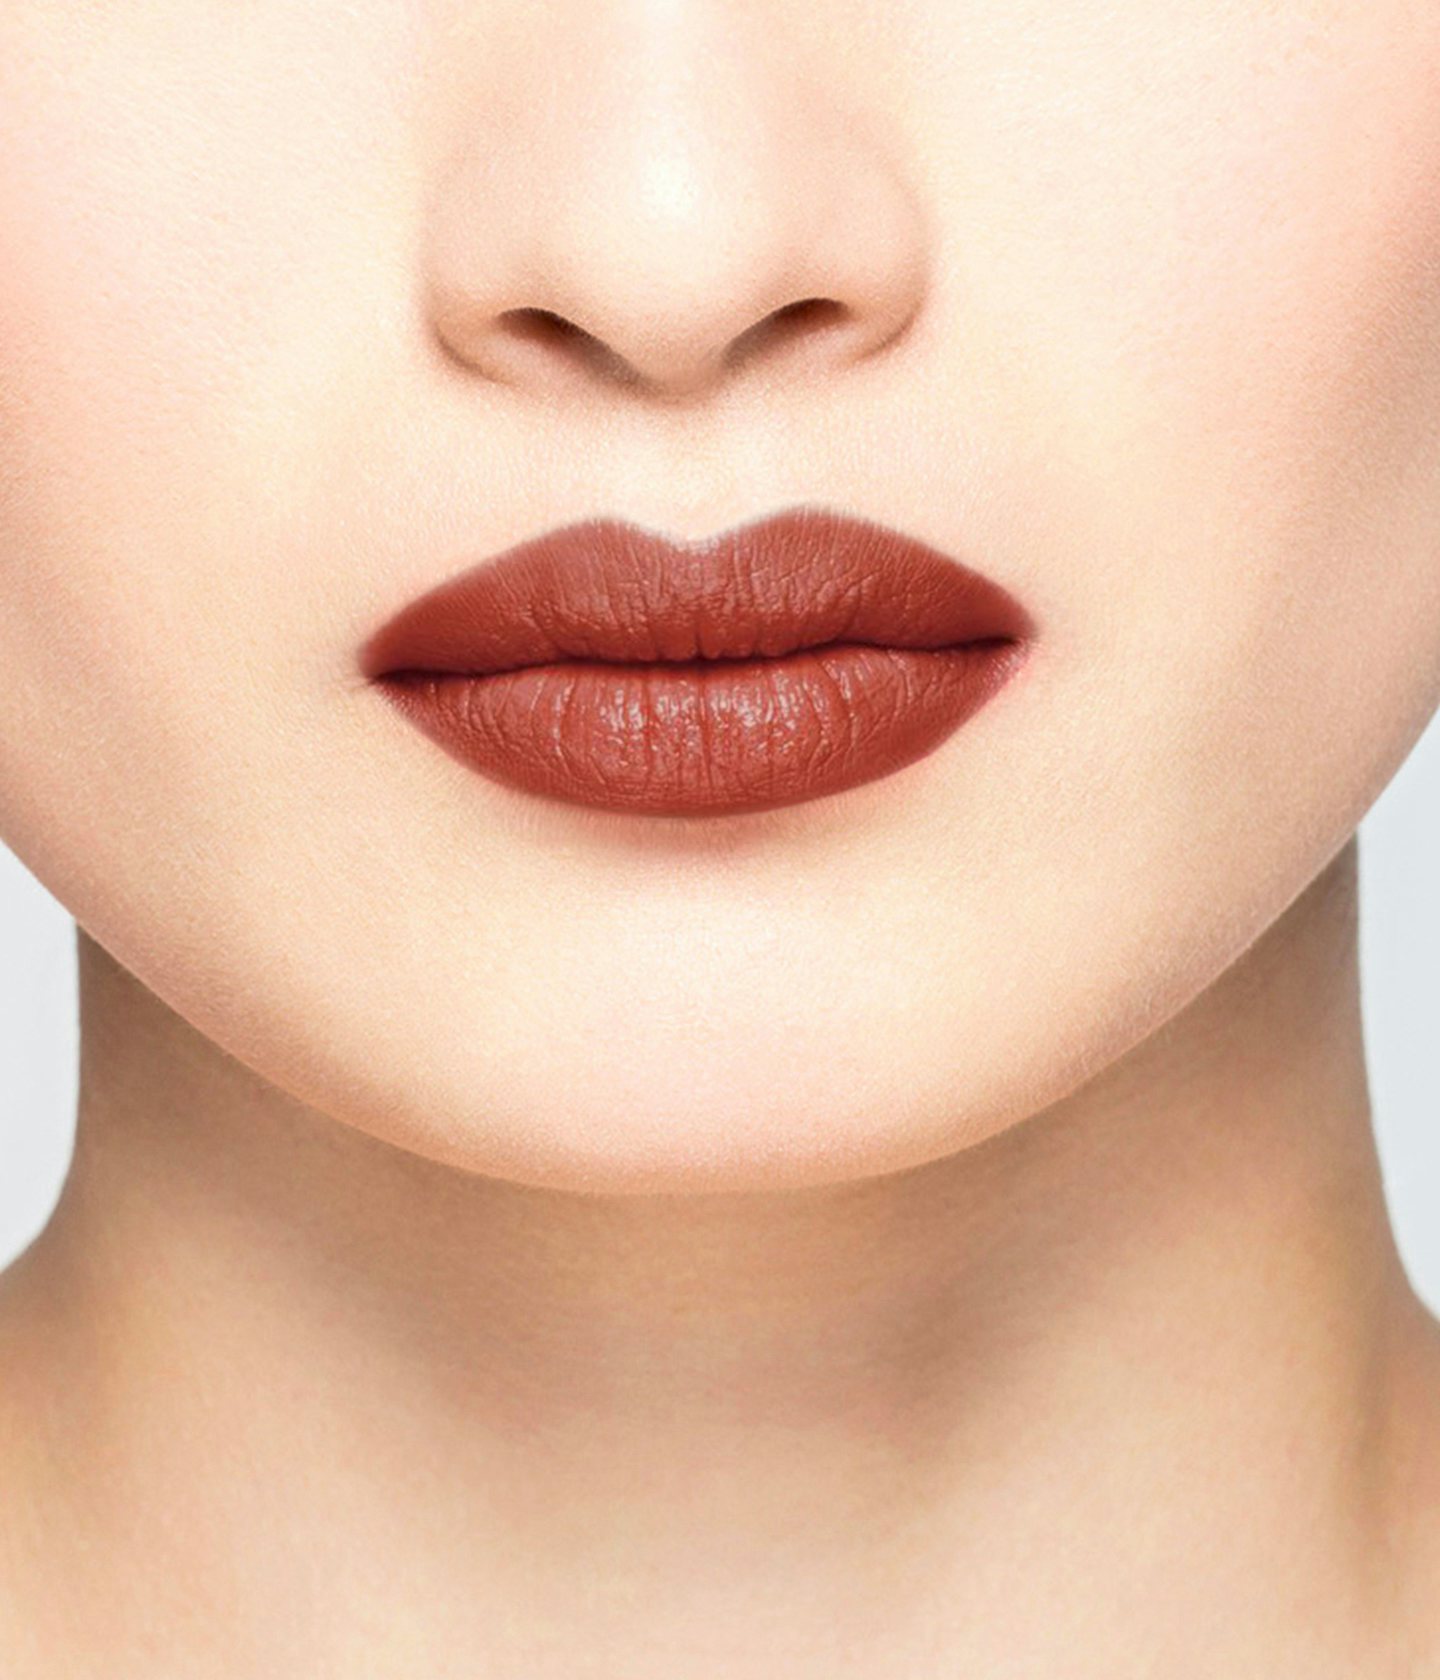 La bouche rouge The Koto balm shade on the lips of an Asian model